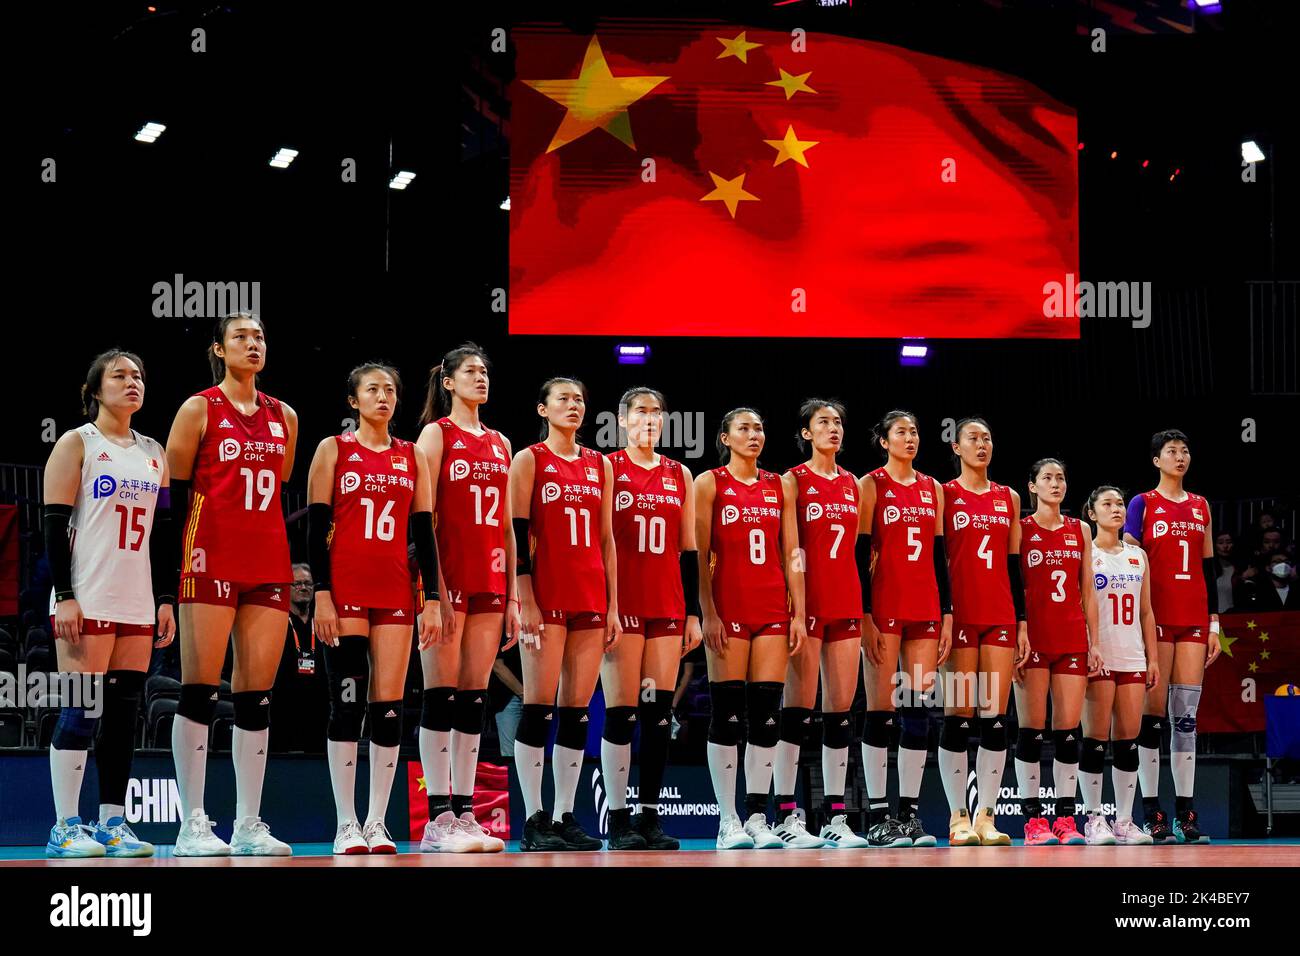 ARNHEM, NETHERLANDS - SEPTEMBER 25: Weiyi Wang of China, Peiyan Chen of China, Xia Ding of China, Yingying Li of China, Yizhu Wang of China, Yunlu Wang of China, Ye Jin of China, Yuanyuan Wang of China, Yi Gao of China, Hanyu Yang of China, Linyu Diao of China, Mengjie Wang of China and Xinyue Yuan of China line up for the national anthem during the Pool D Phase 1 match between China and Argentina on Day 3 of the FIVB Volleyball Womens World Championship 2022 at the Gelredome on September 25, 2022 in Arnhem, Netherlands (Photo by Rene Nijhuis/Orange Pictures) Stock Photo